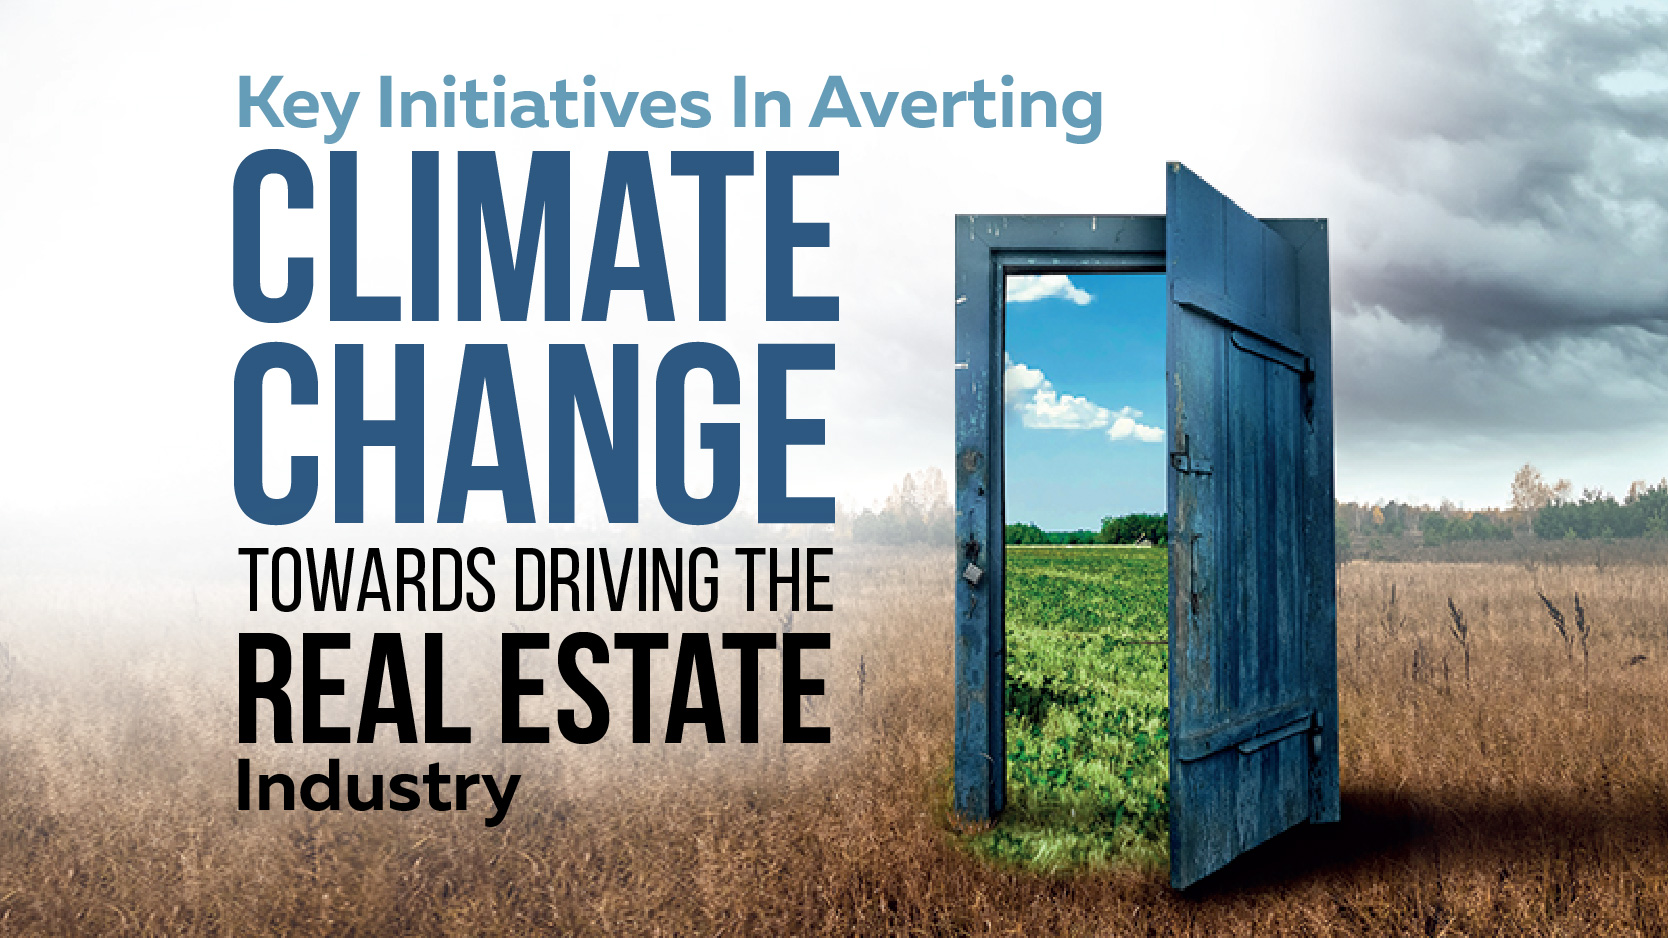 Key Initiatives in Averting Climate Change Towards Driving the Real Estate Industry